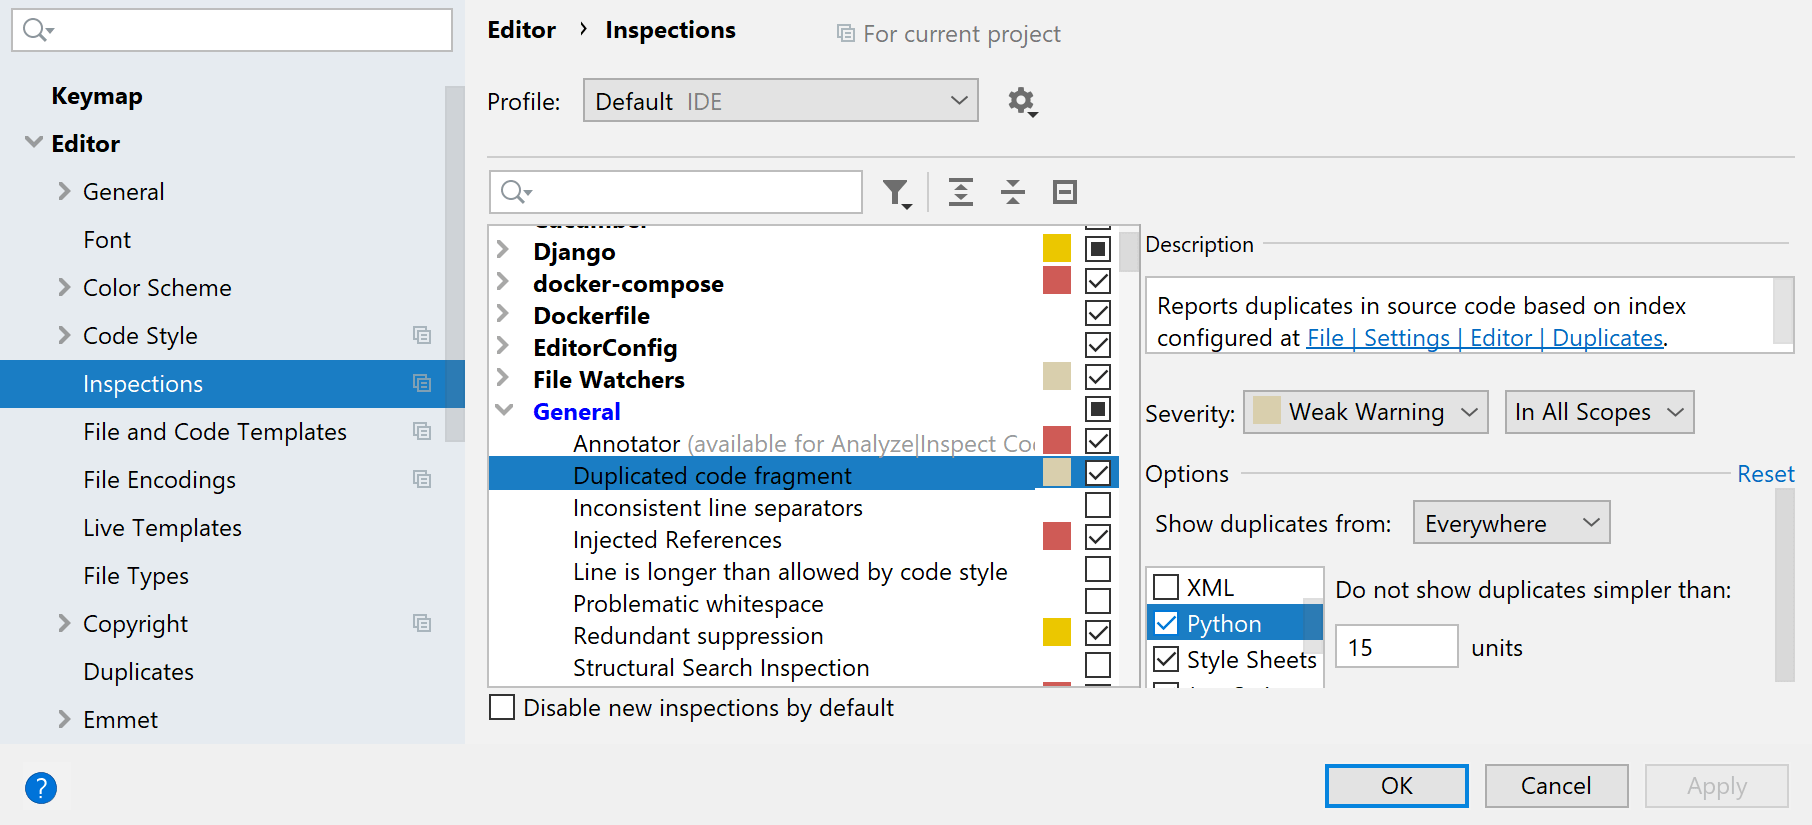 Duplicated Code Fragment inspection settings